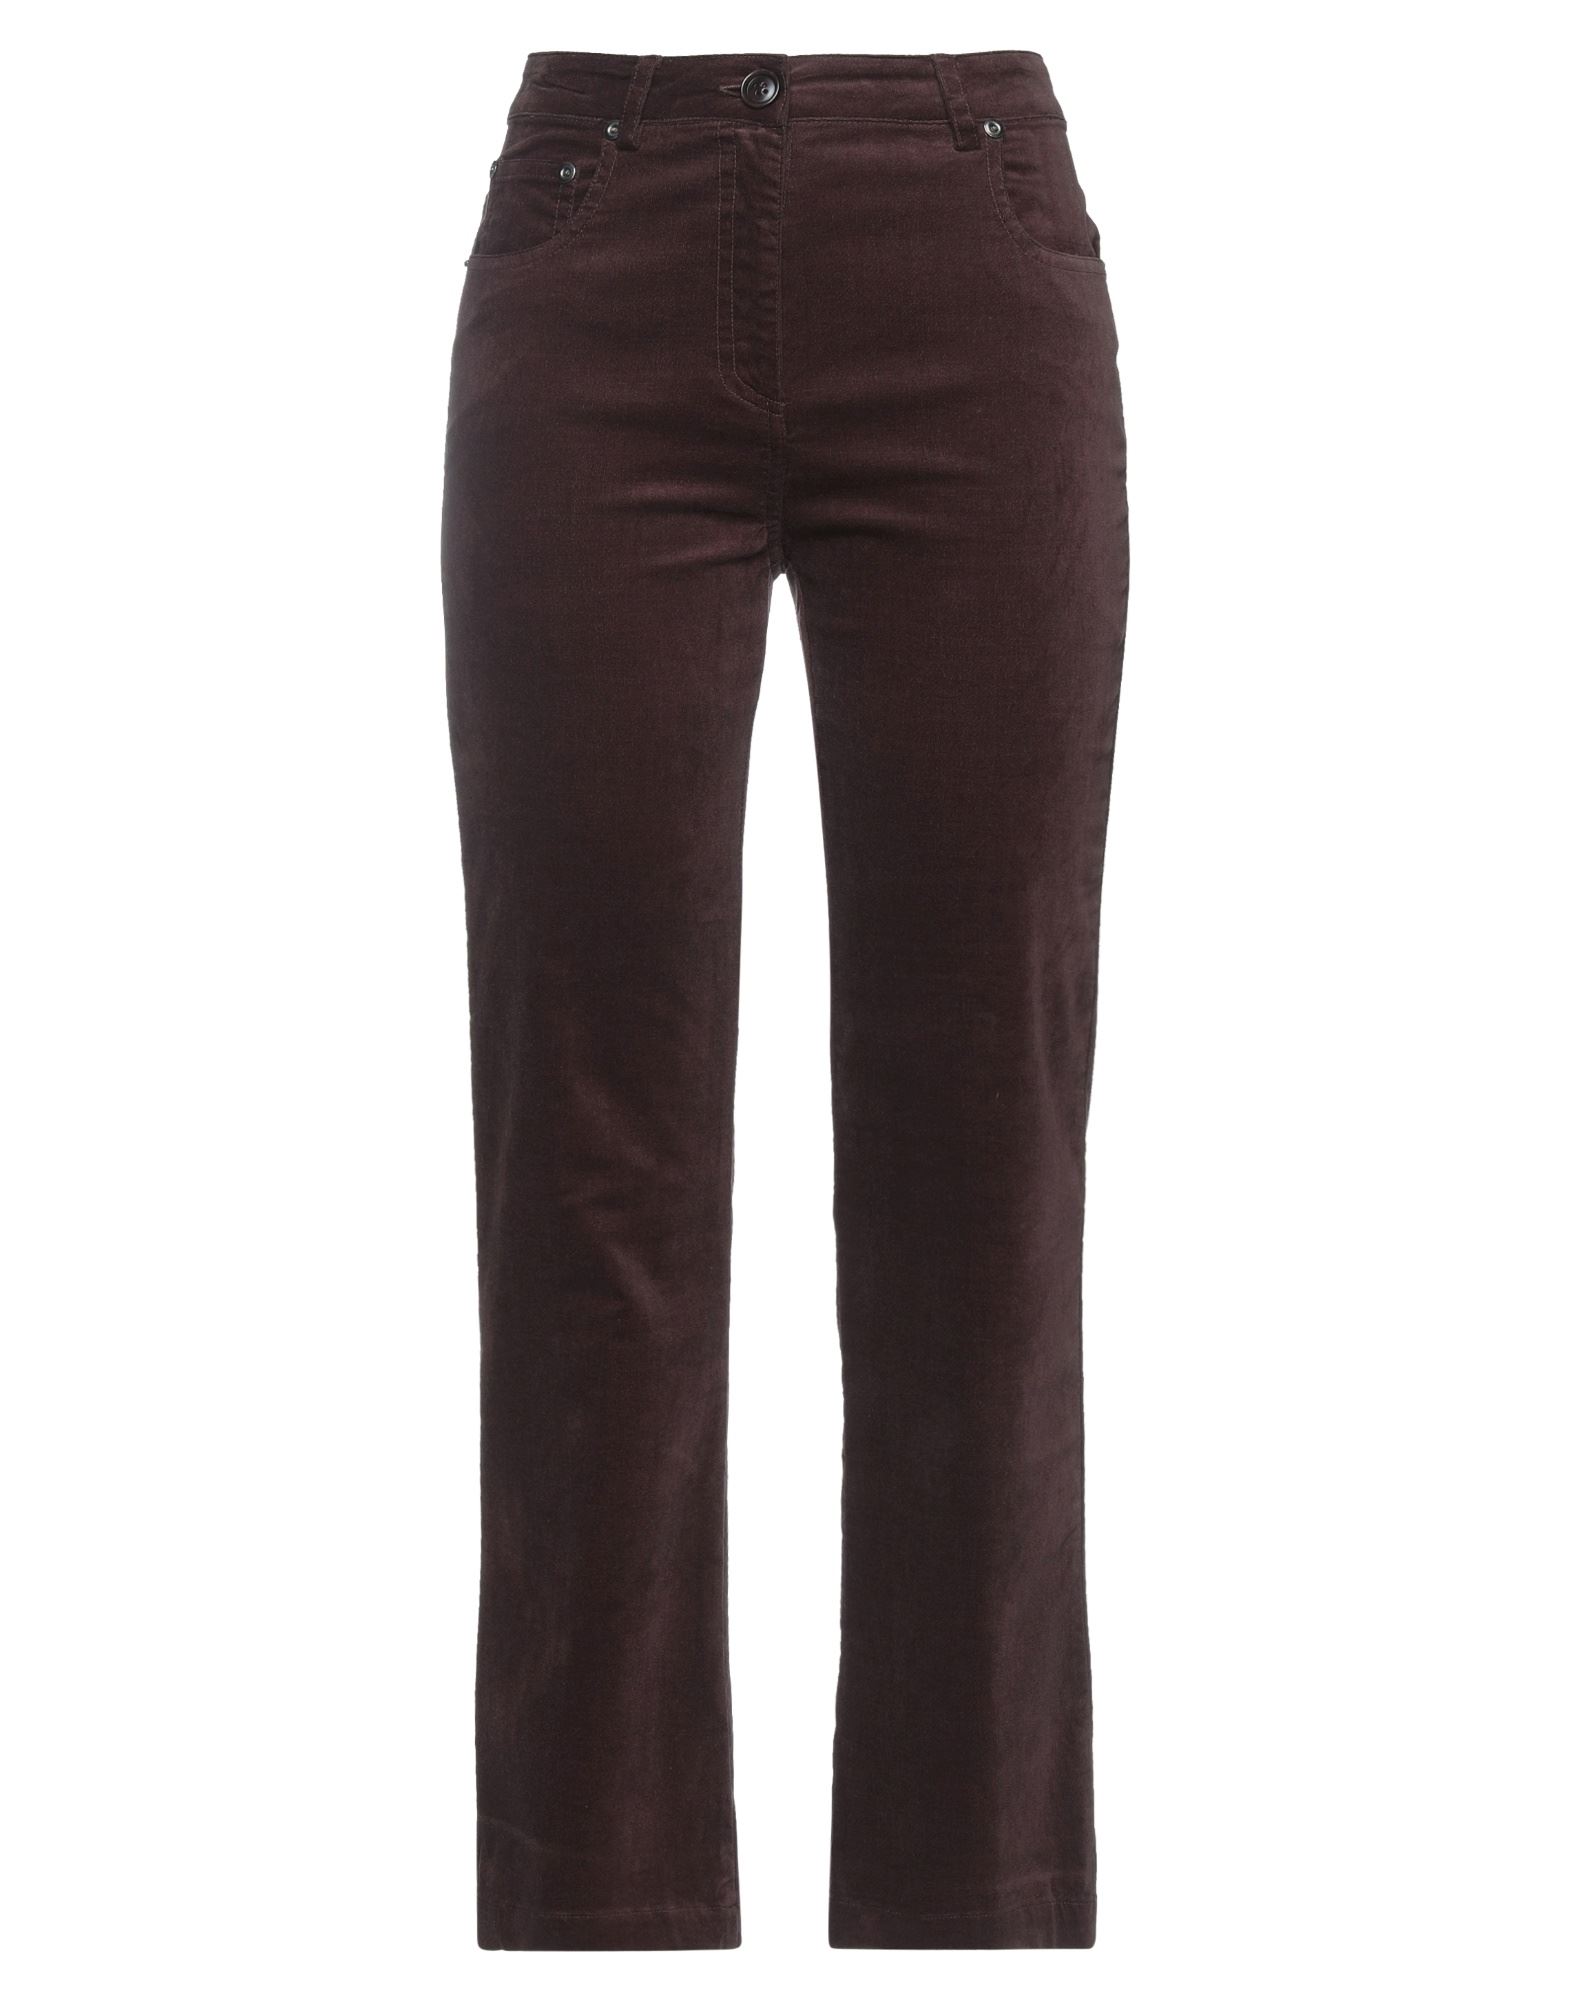 Semicouture Pants In Brown